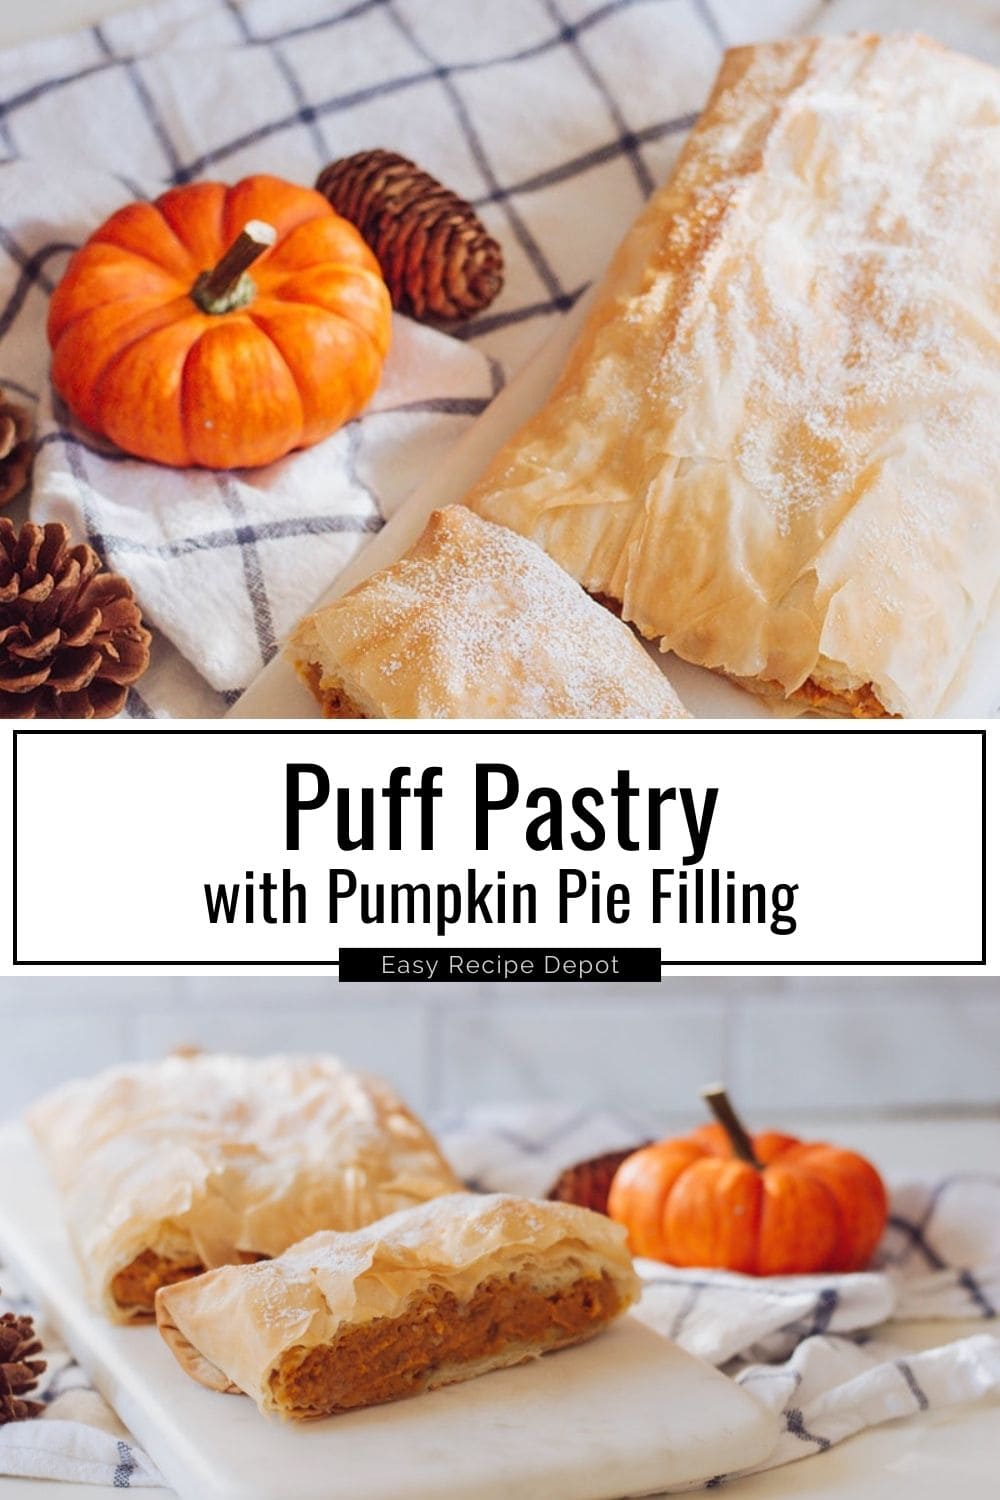 Puff pastry with pumpkin pie filling.